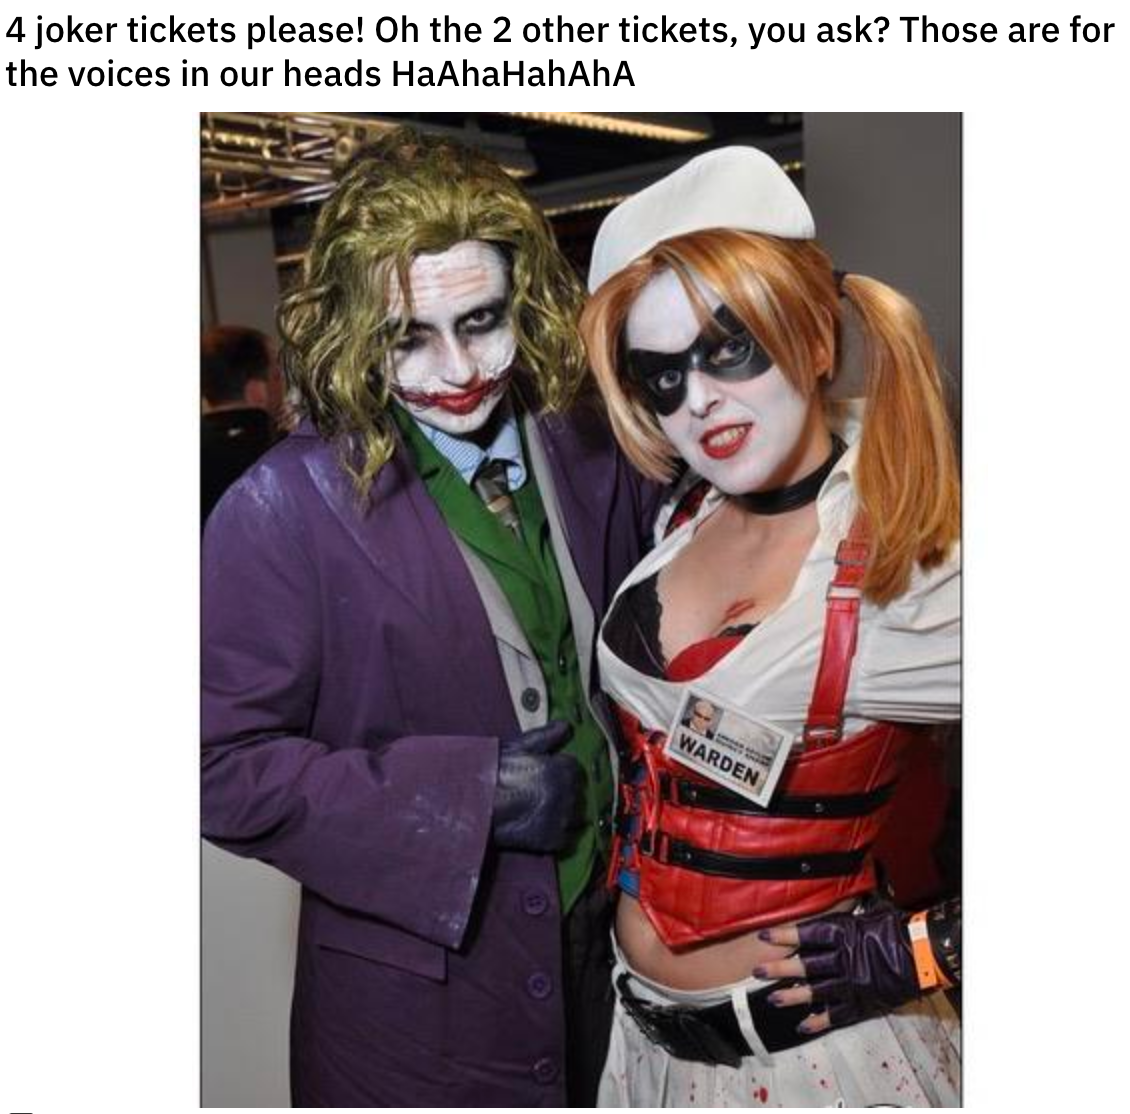 4 joker tickets please! Oh the 2 other tickets, you ask? Those are for the voices in our heads HaAhaHahAhA